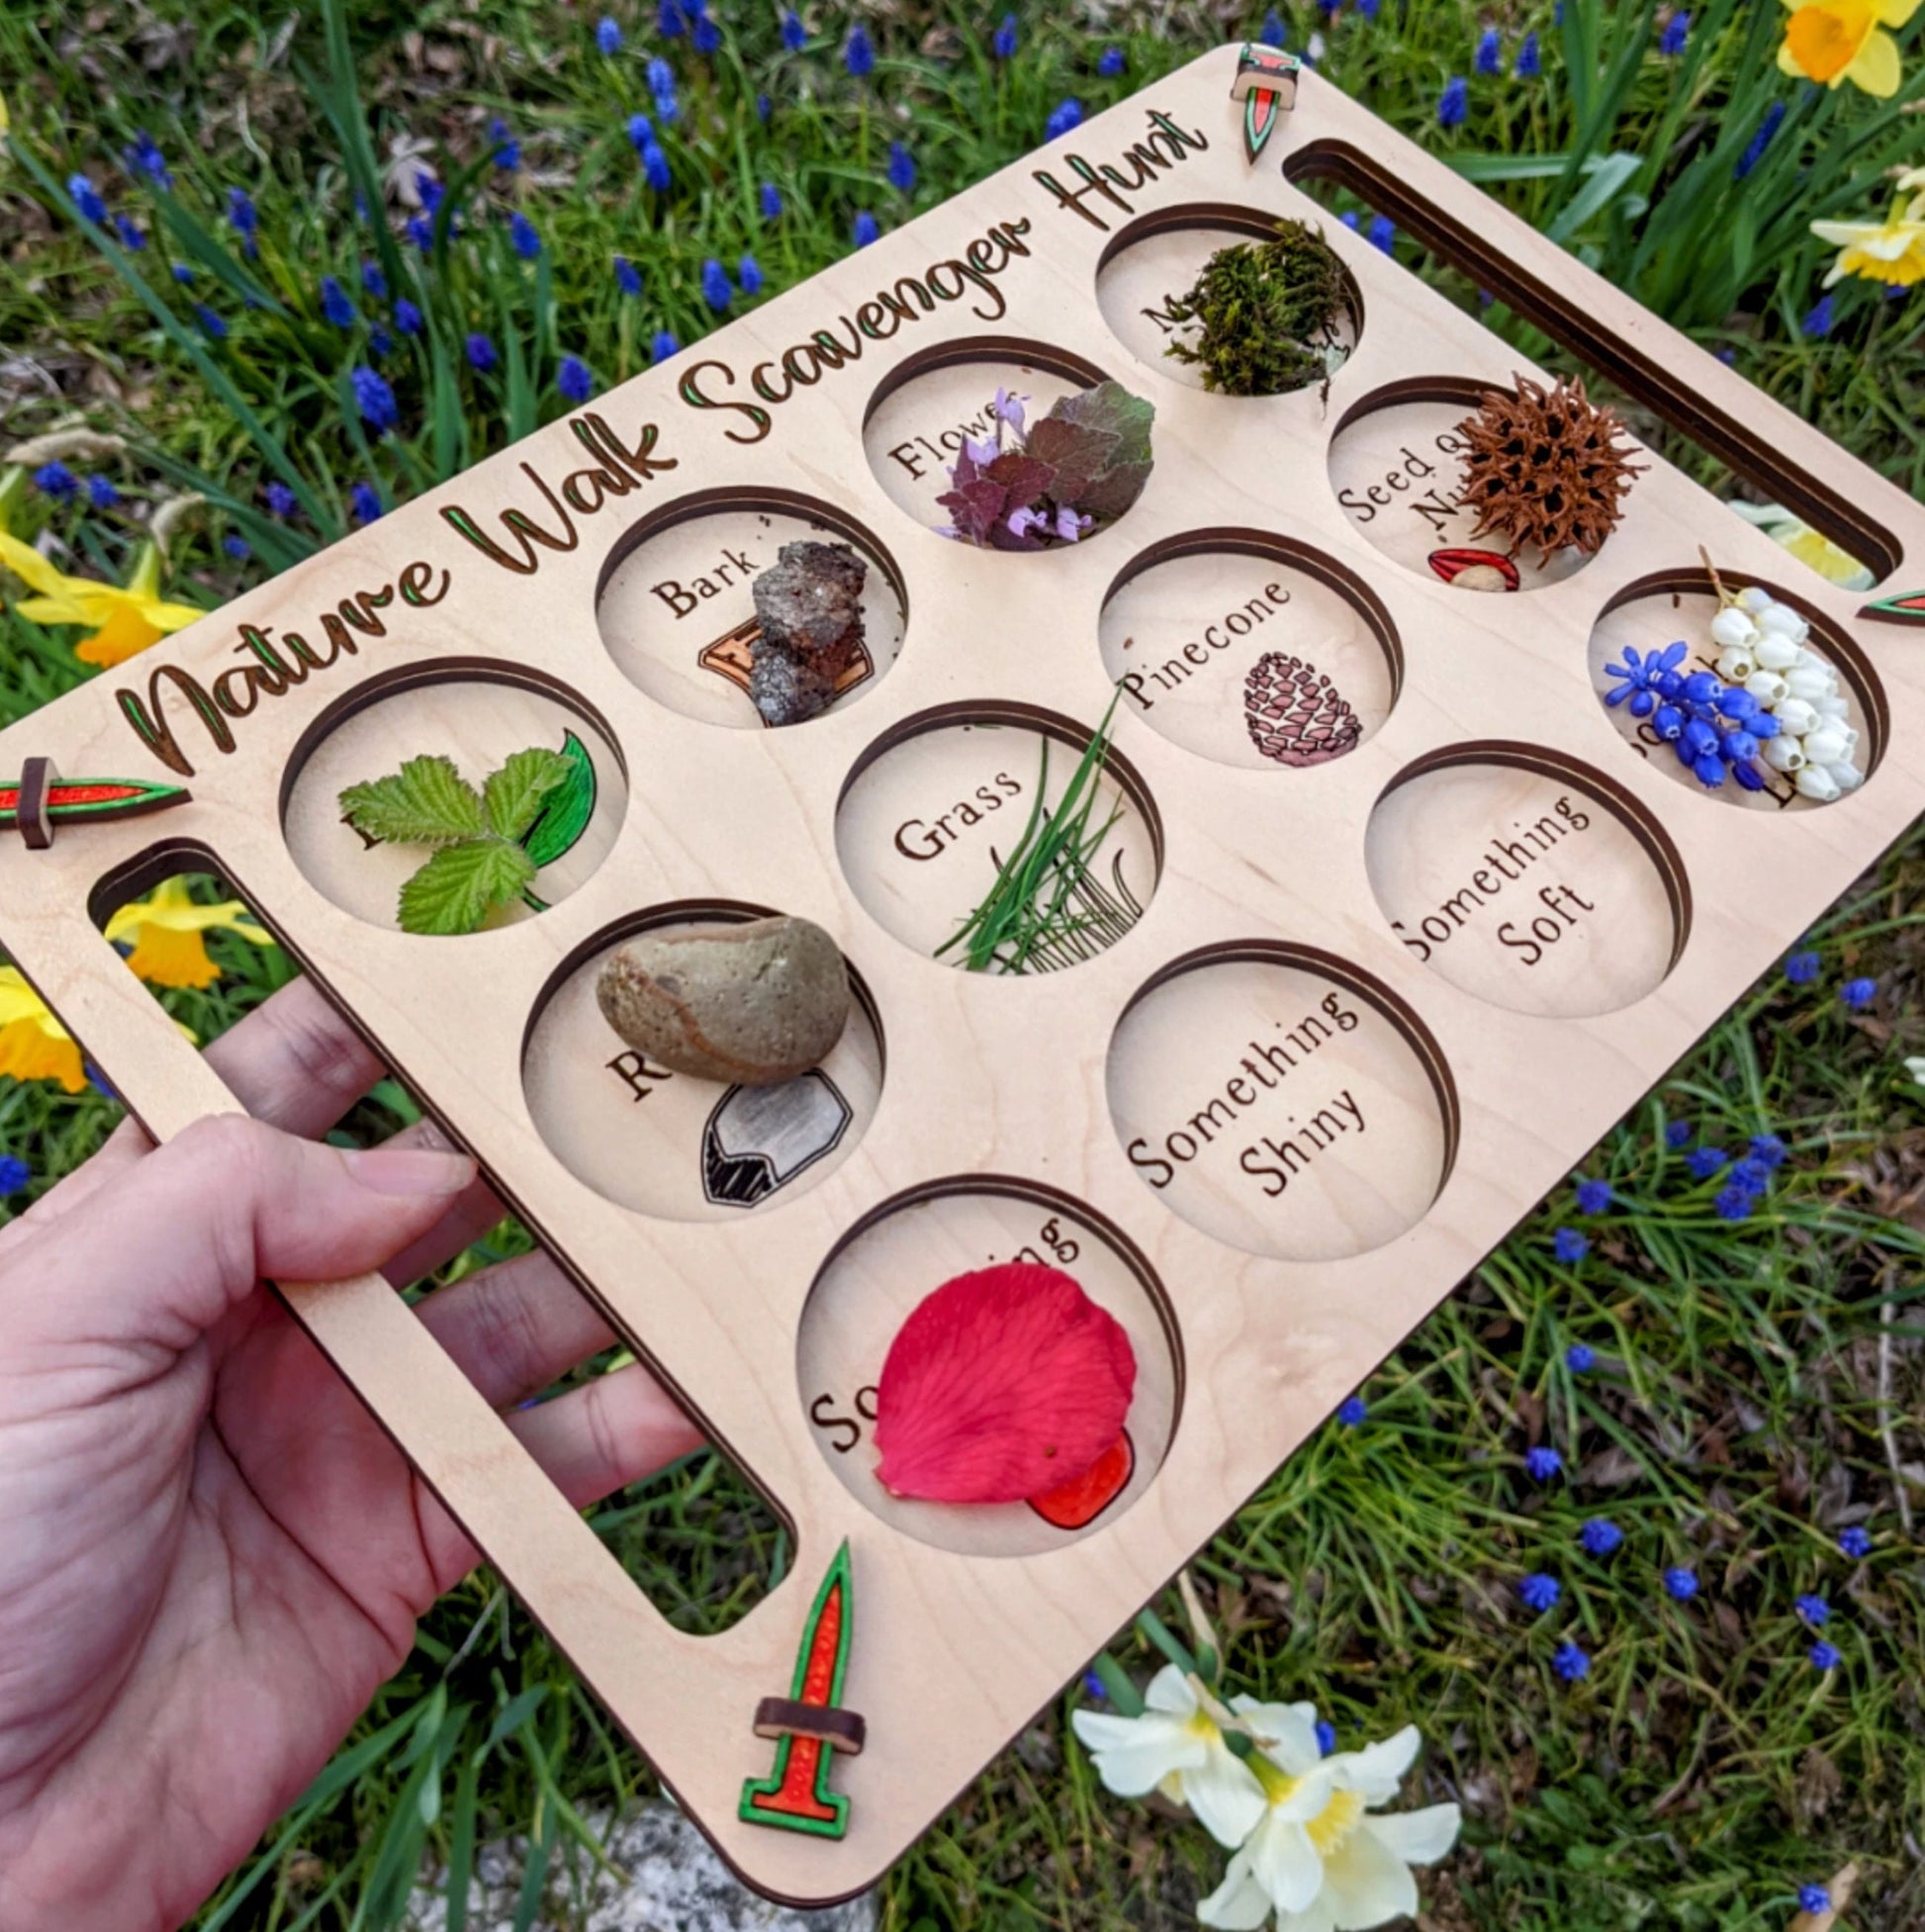 2 In 1 Beach Or Forest Scavenger Hunting Tray | Kids Outdoor Nature Activity Set | Assembly Required